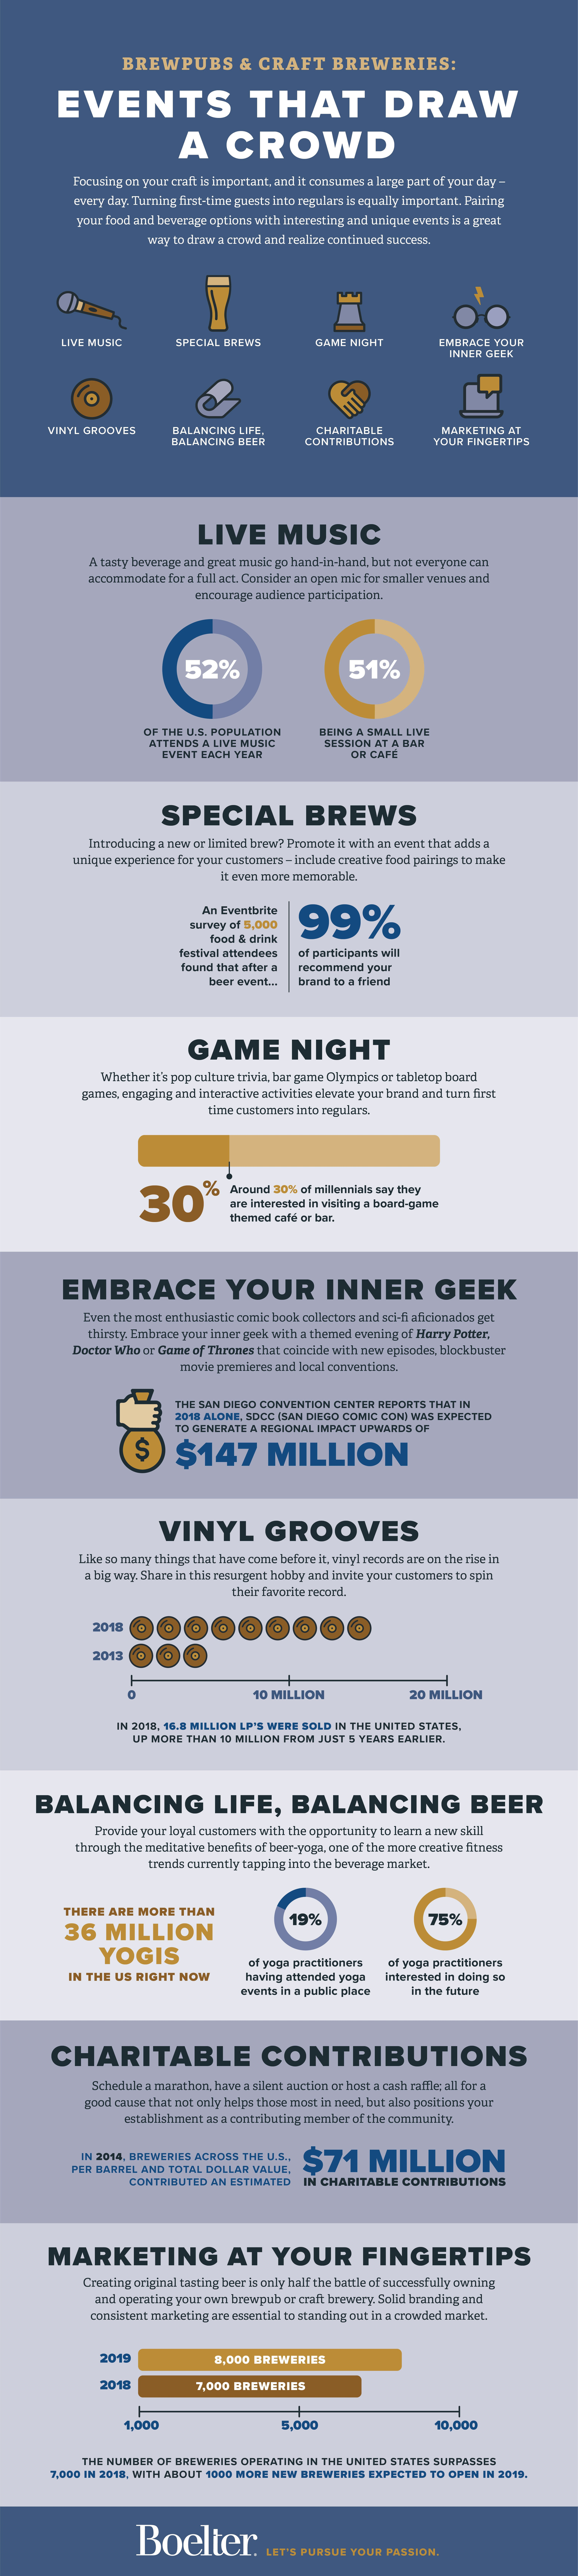 Events-that-draw-a-crowd-INFOGRAPHIC